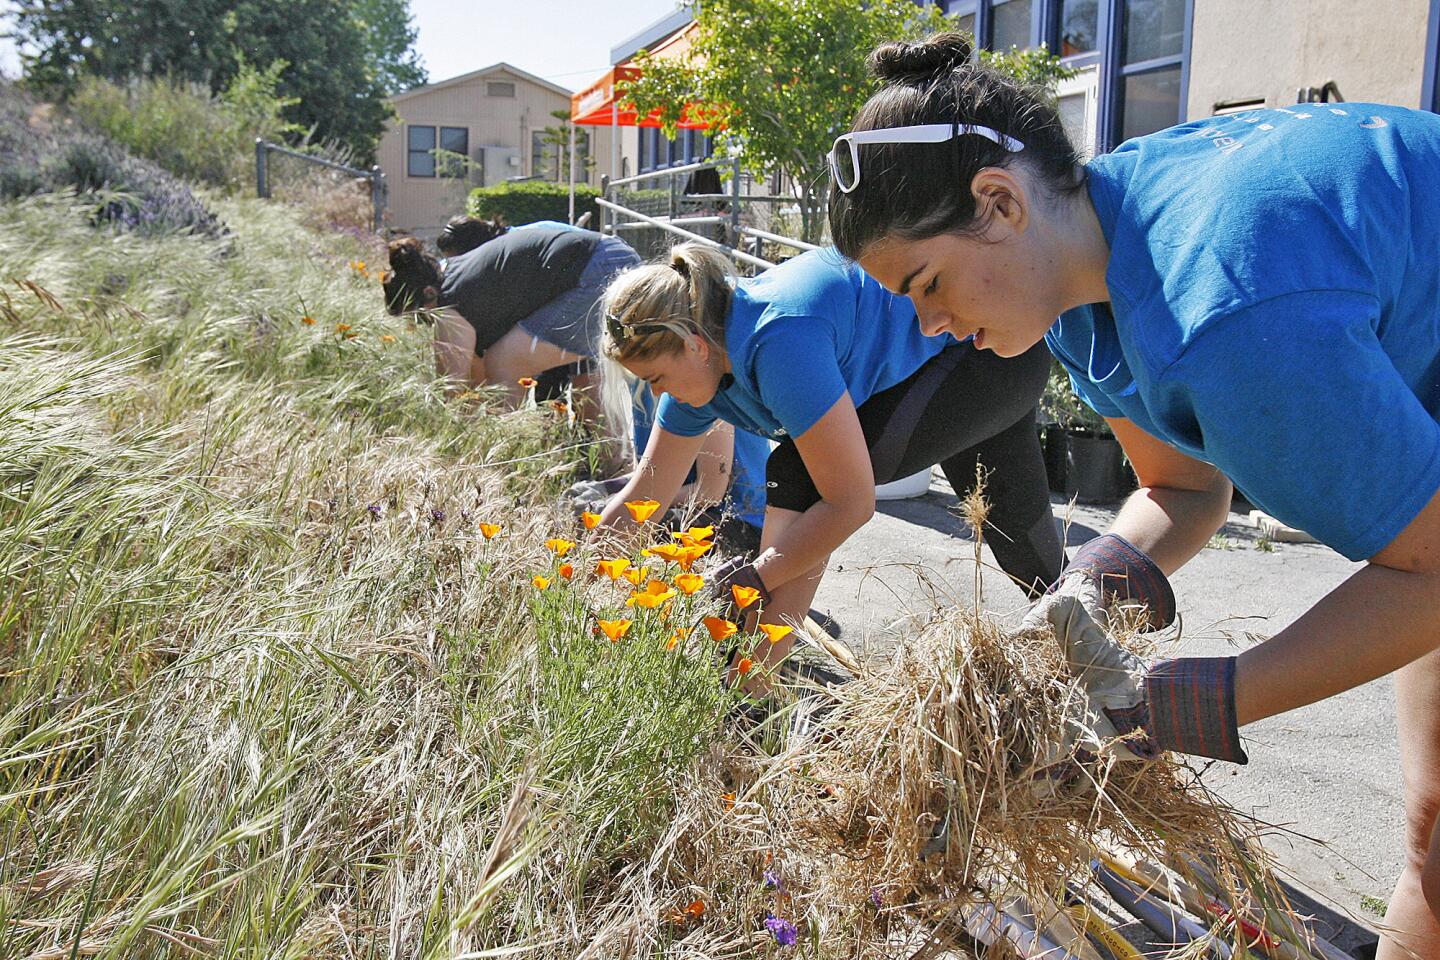 Photo Gallery: Nickelodeon lend artistic talent to projects at Thomas Jefferson Elementary